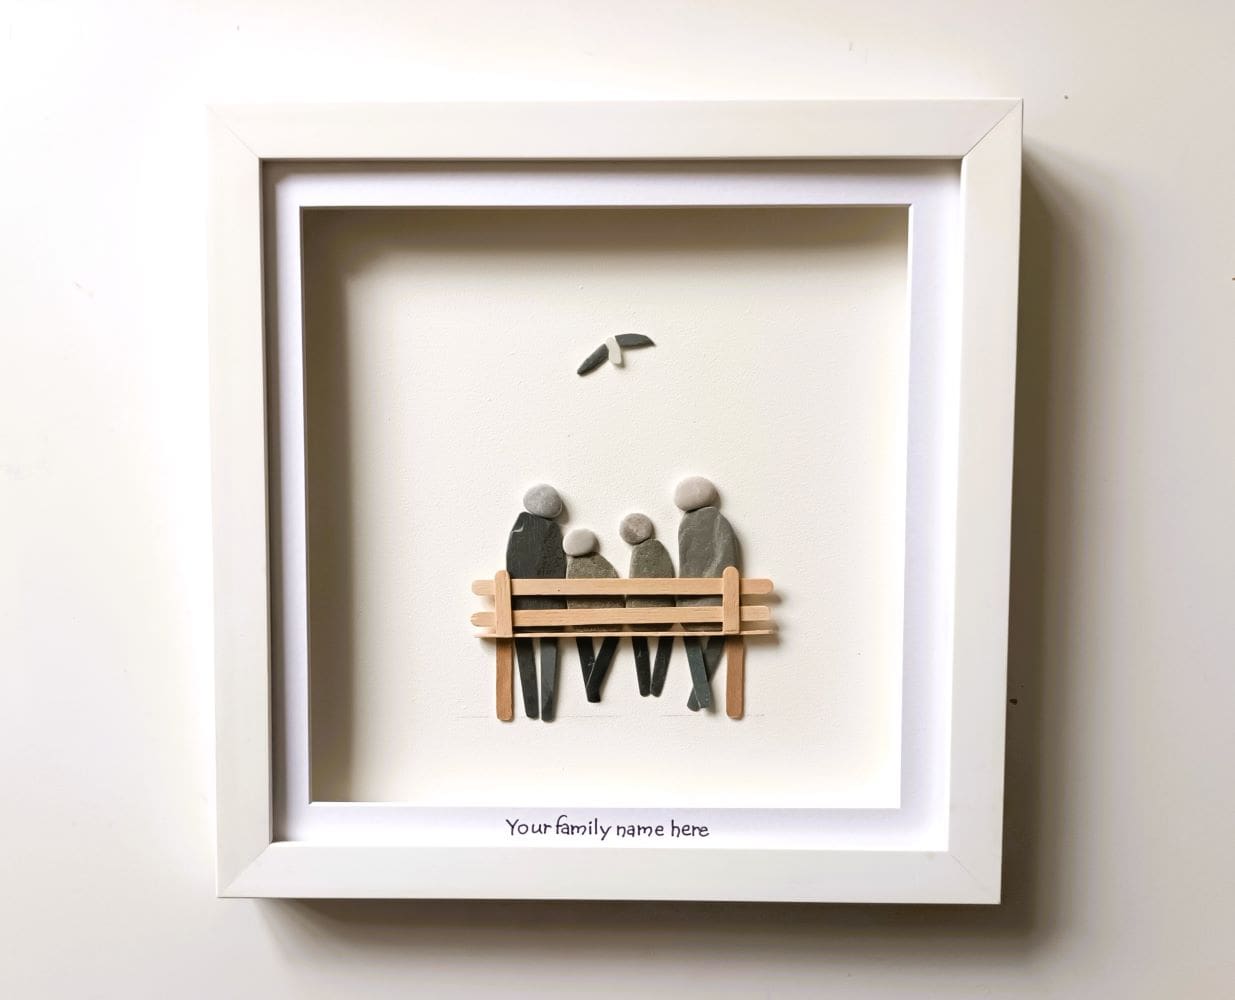 Framed portrait of family of four depicted in stone sitting on a wooden bench